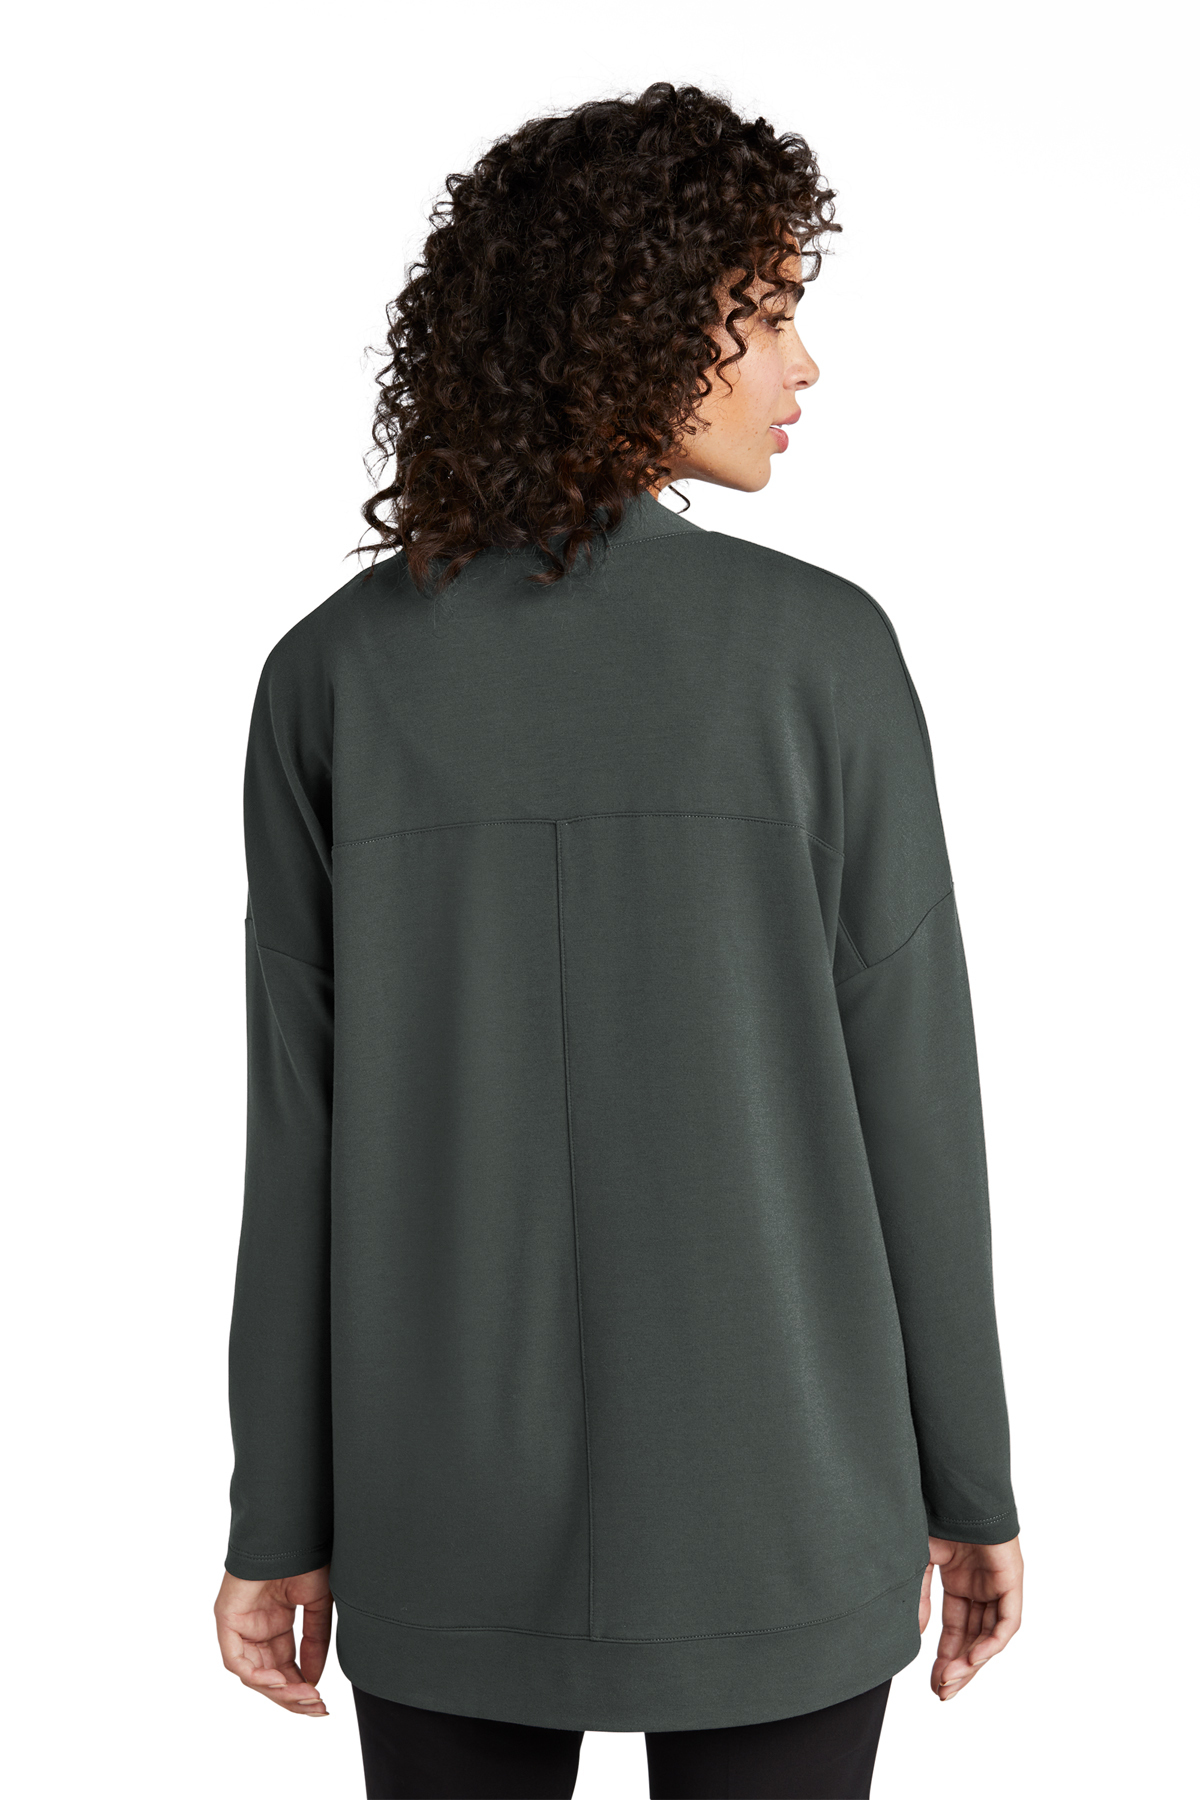 Mercer+Mettle Women's Stretch Open-Front Cardigan, Product